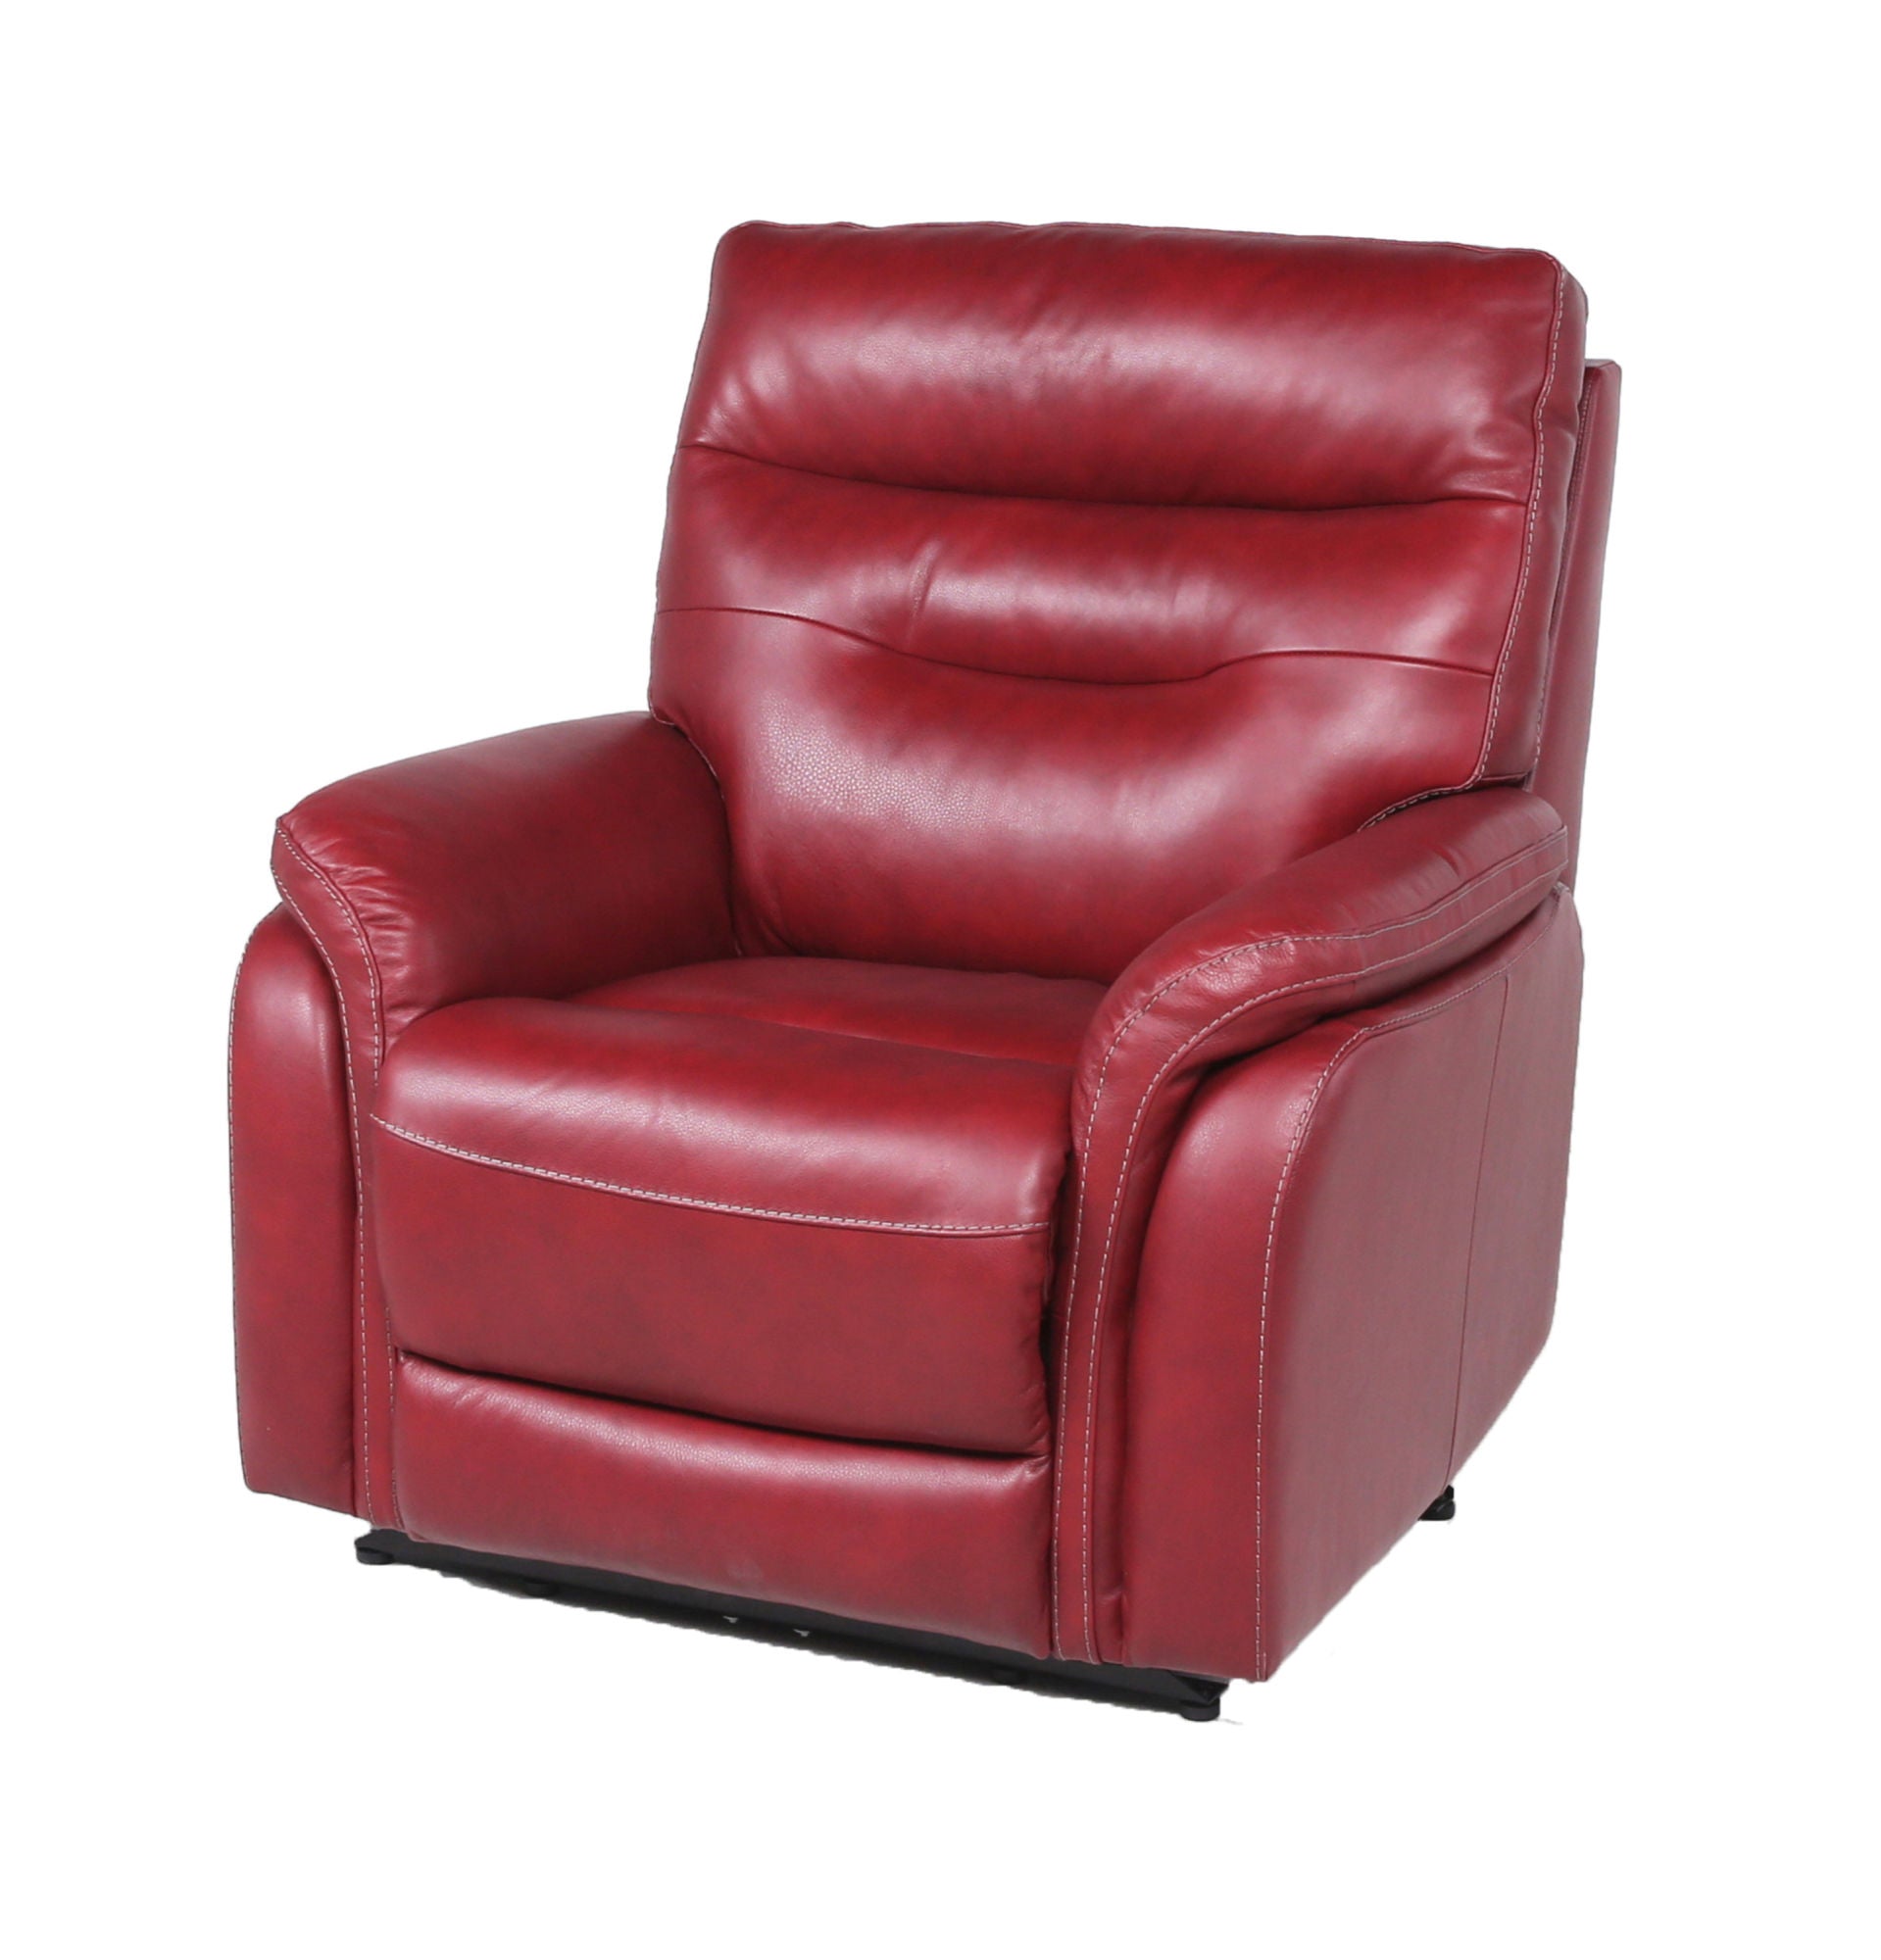 Top-Grain Leather Motion Recliner - Contemporary Style, Control Panel - USB Charging, Home Button - Wine Home Decor by Design